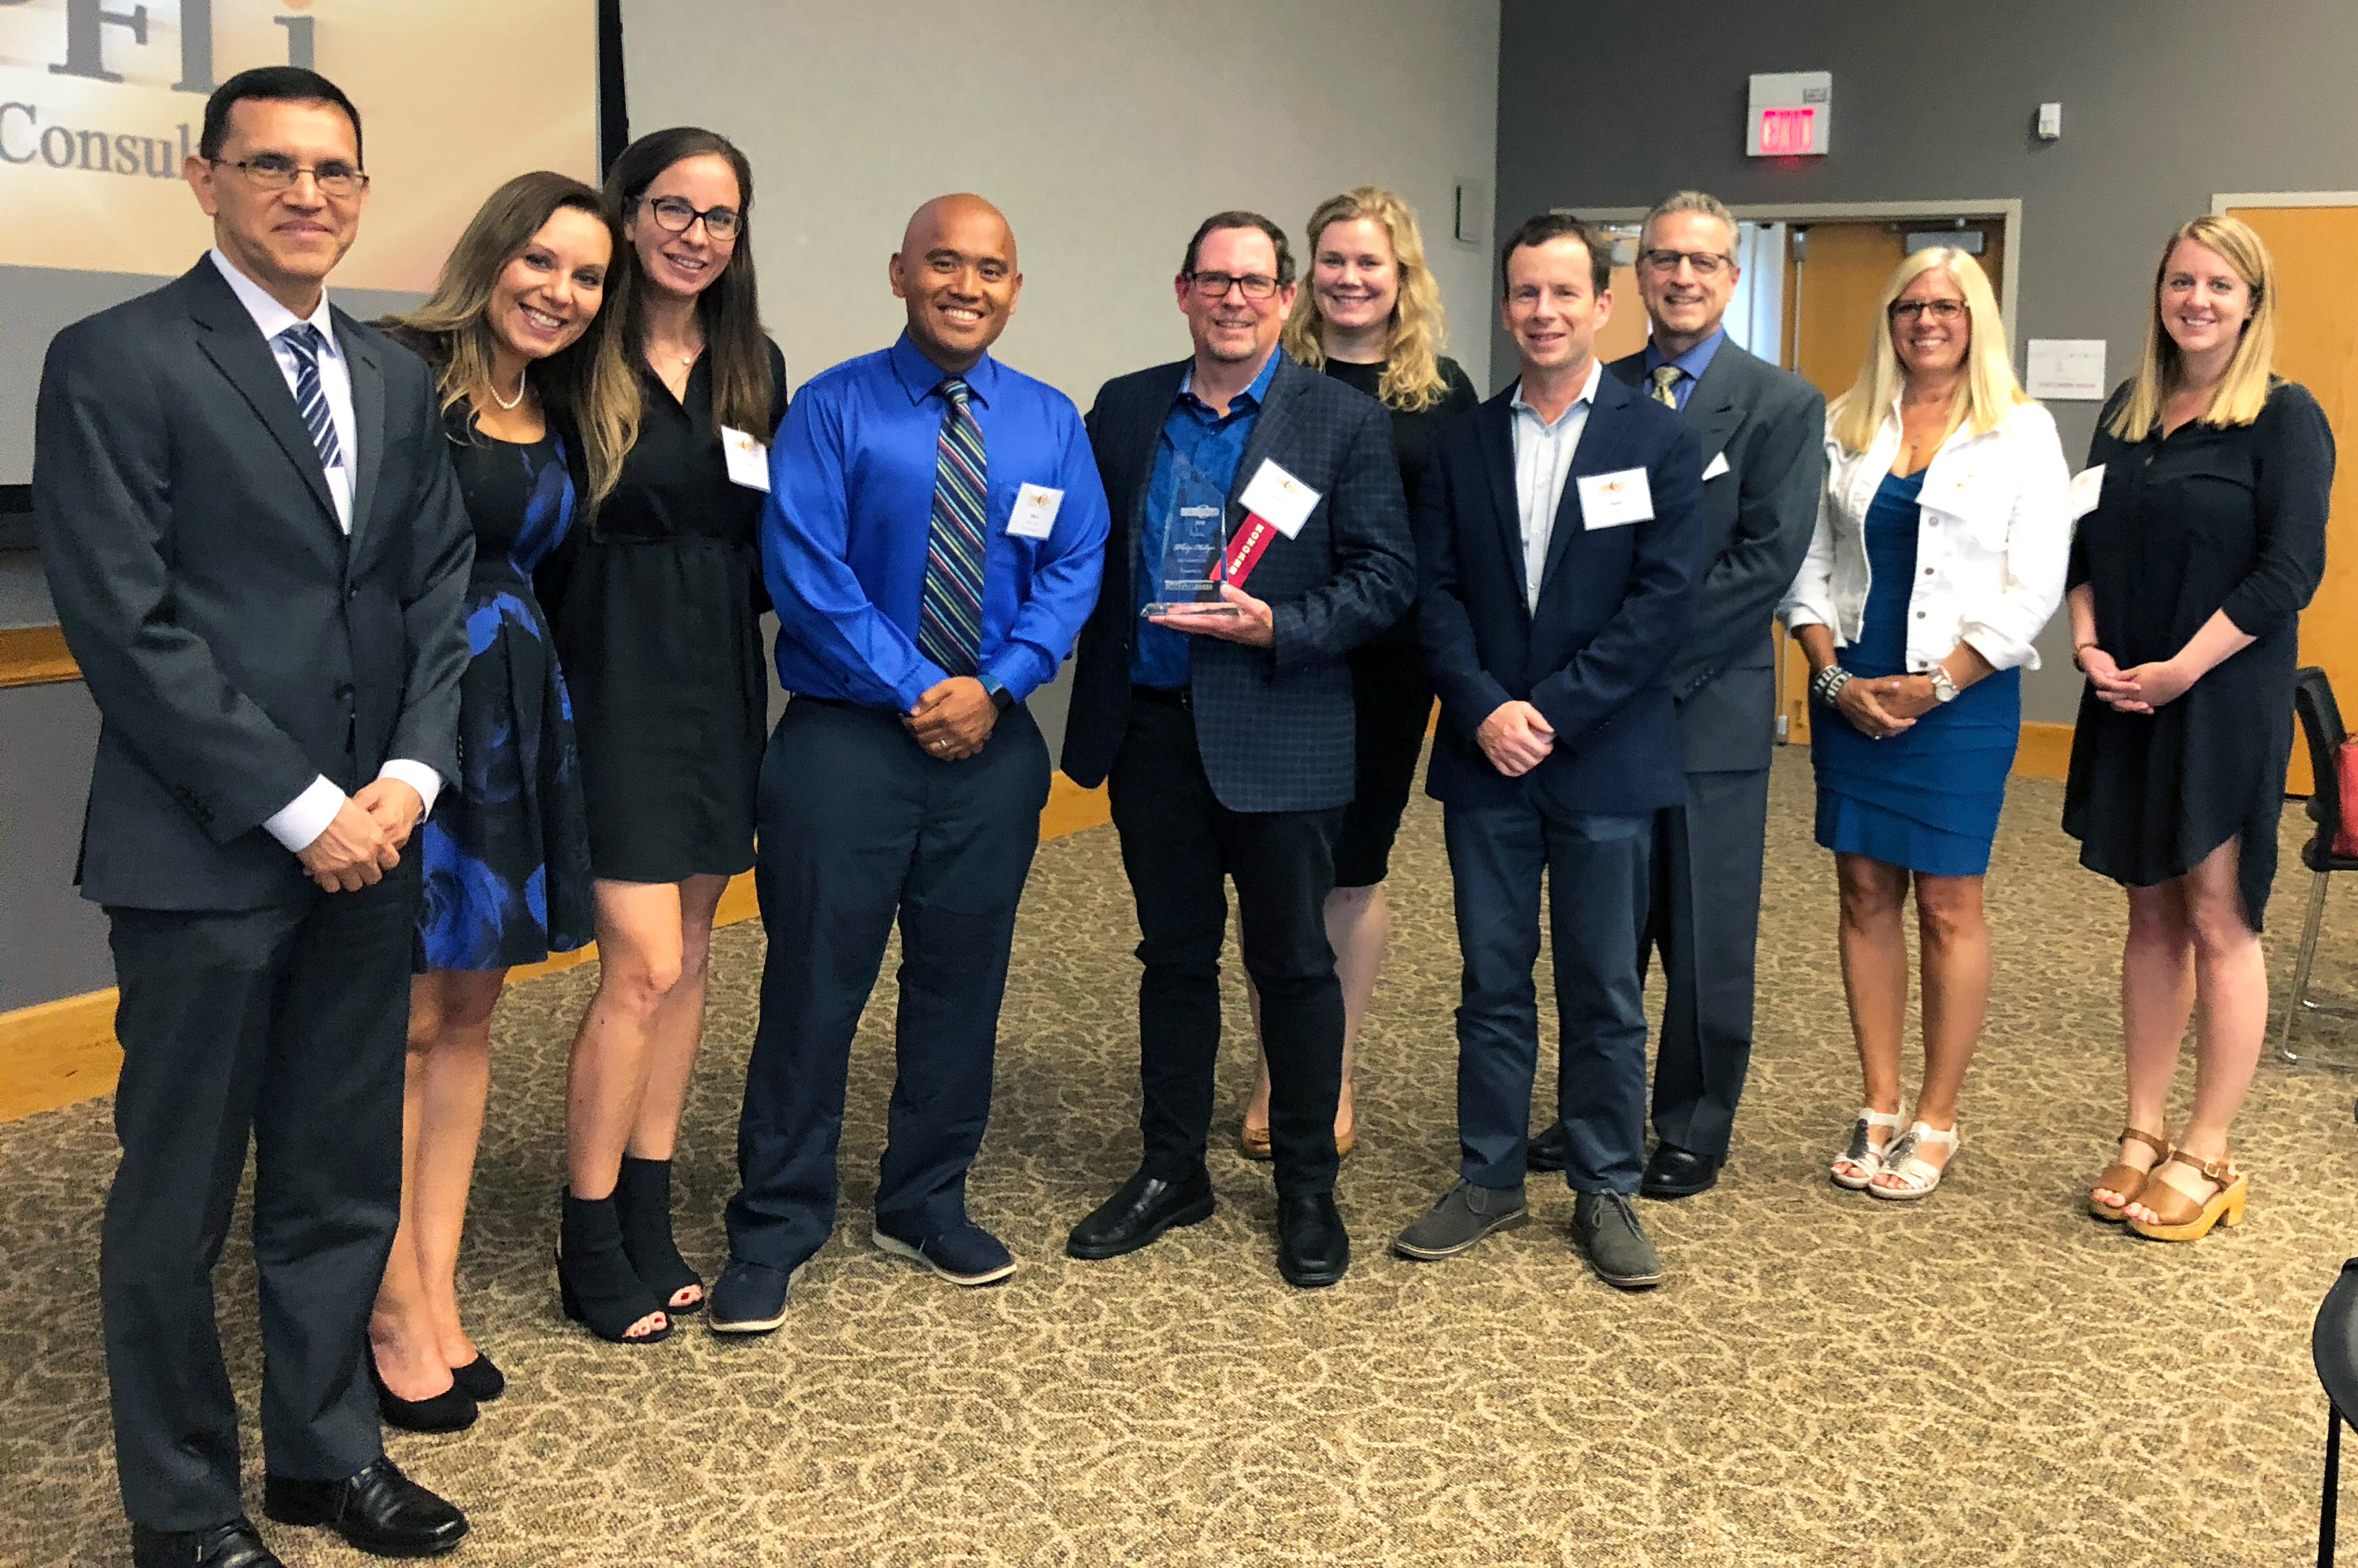 Phil Hollyer, co-founder and CEO of Bounteous, sports his C-Suite of the Year award surrounded by colleagues at the awards reception on Thursday, July 26 in Naperville, IL. 